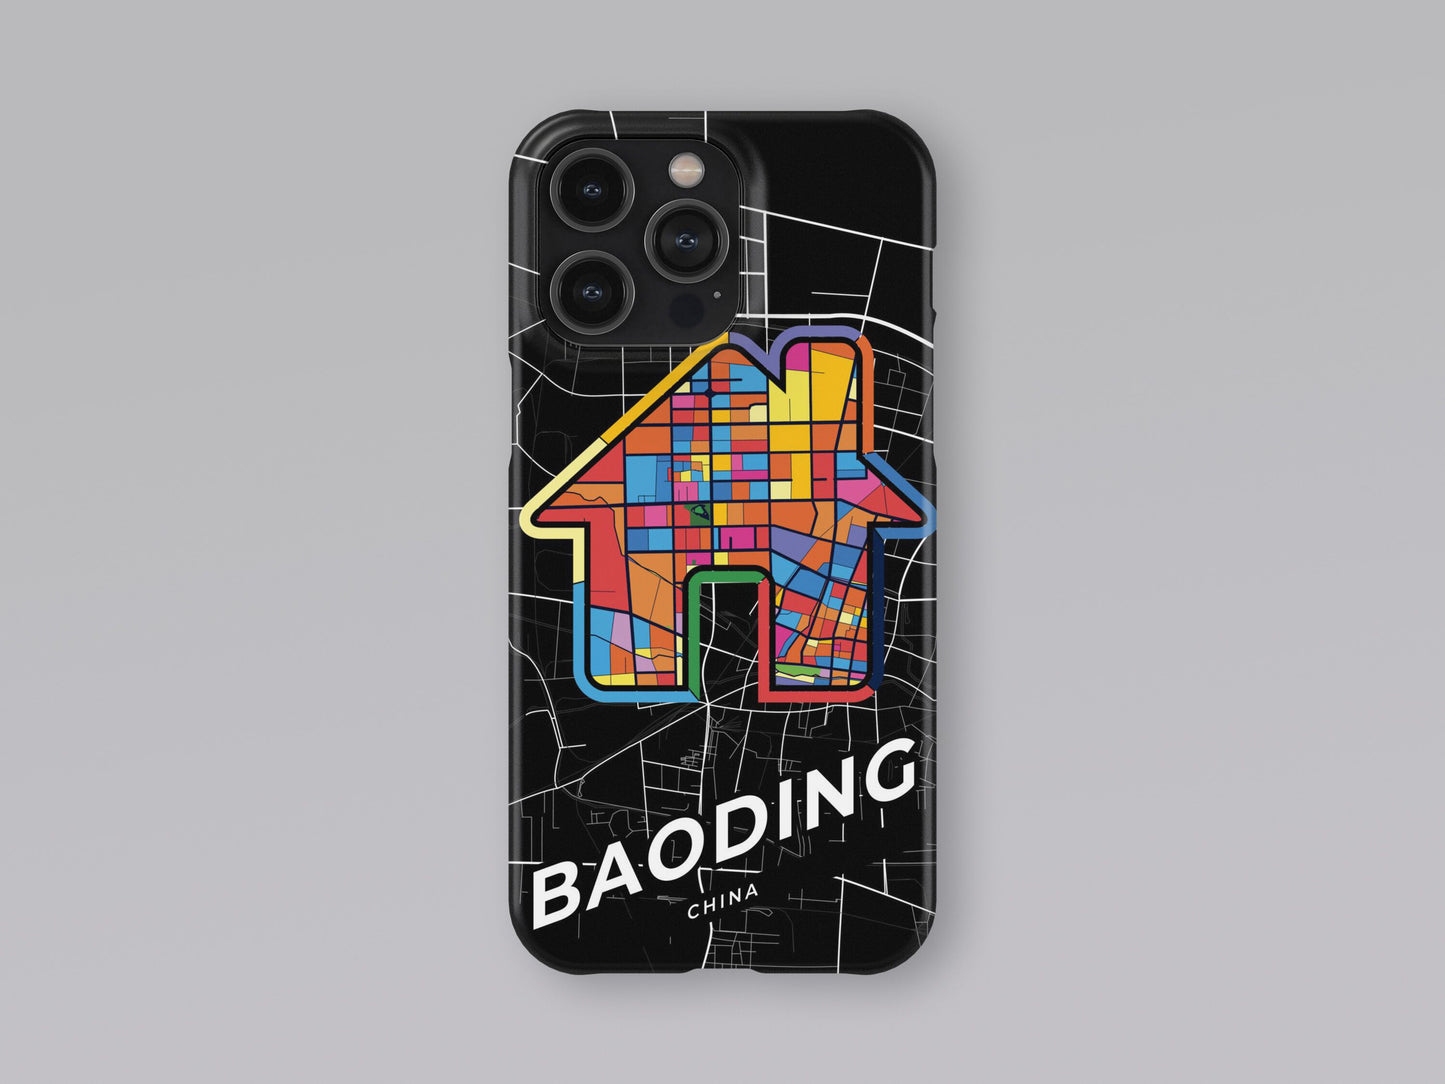 Baoding China slim phone case with colorful icon. Birthday, wedding or housewarming gift. Couple match cases. 3